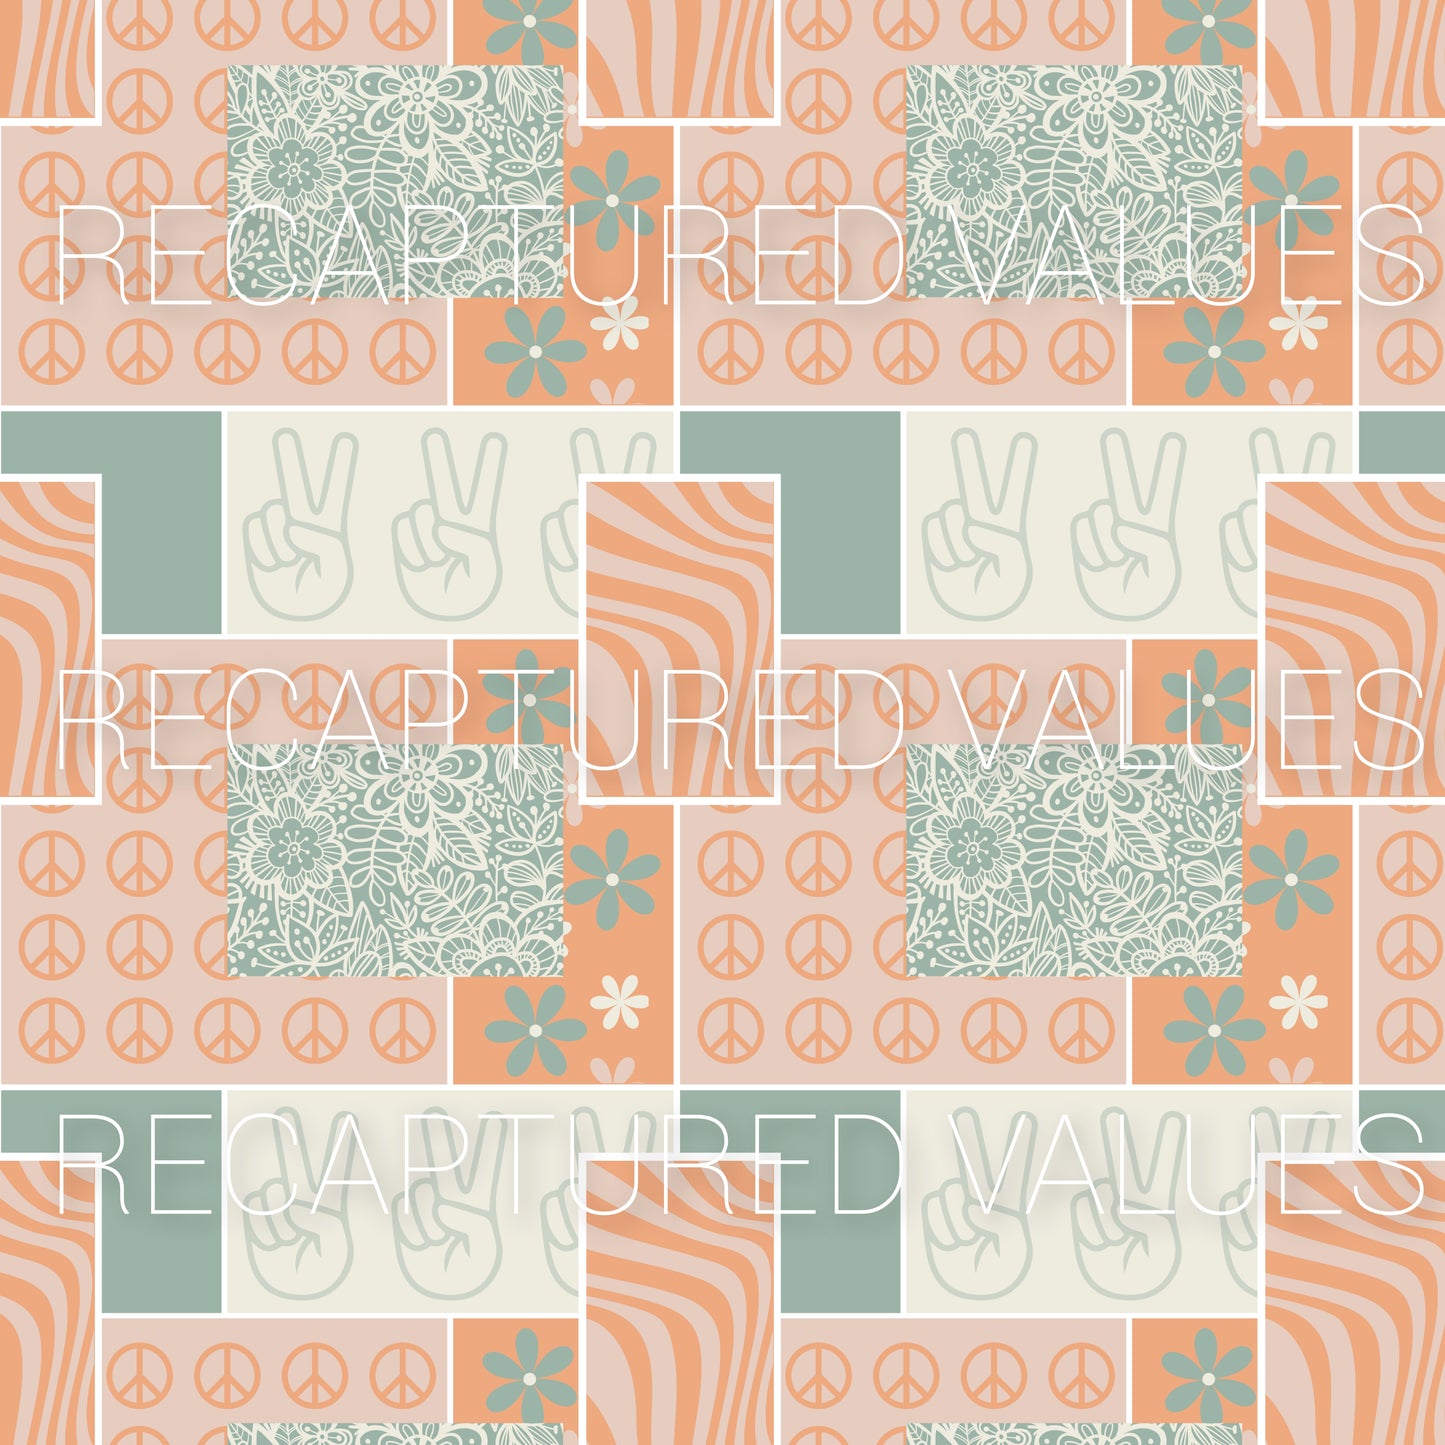 Groovy Retro Delicate Harmony Patchwork || Sage Green, Apricot, Cameo Pink, Linen, and White - Recaptured Values